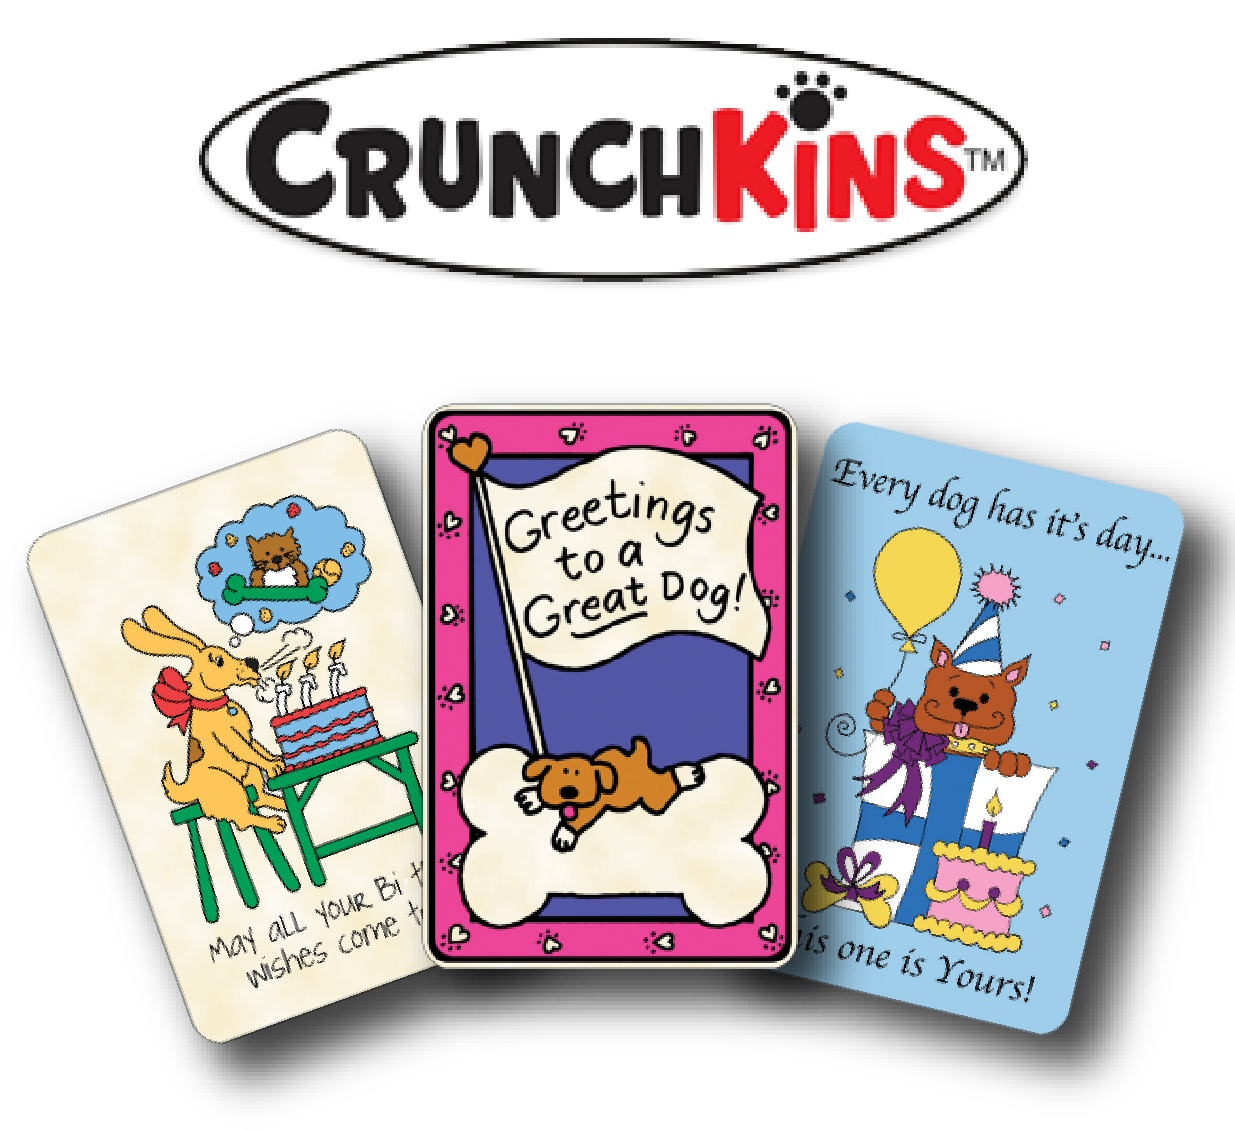 Edible Greeting Cards - Crunchkins Edible Crunch Card, Greetings To A Great (1250x1250)